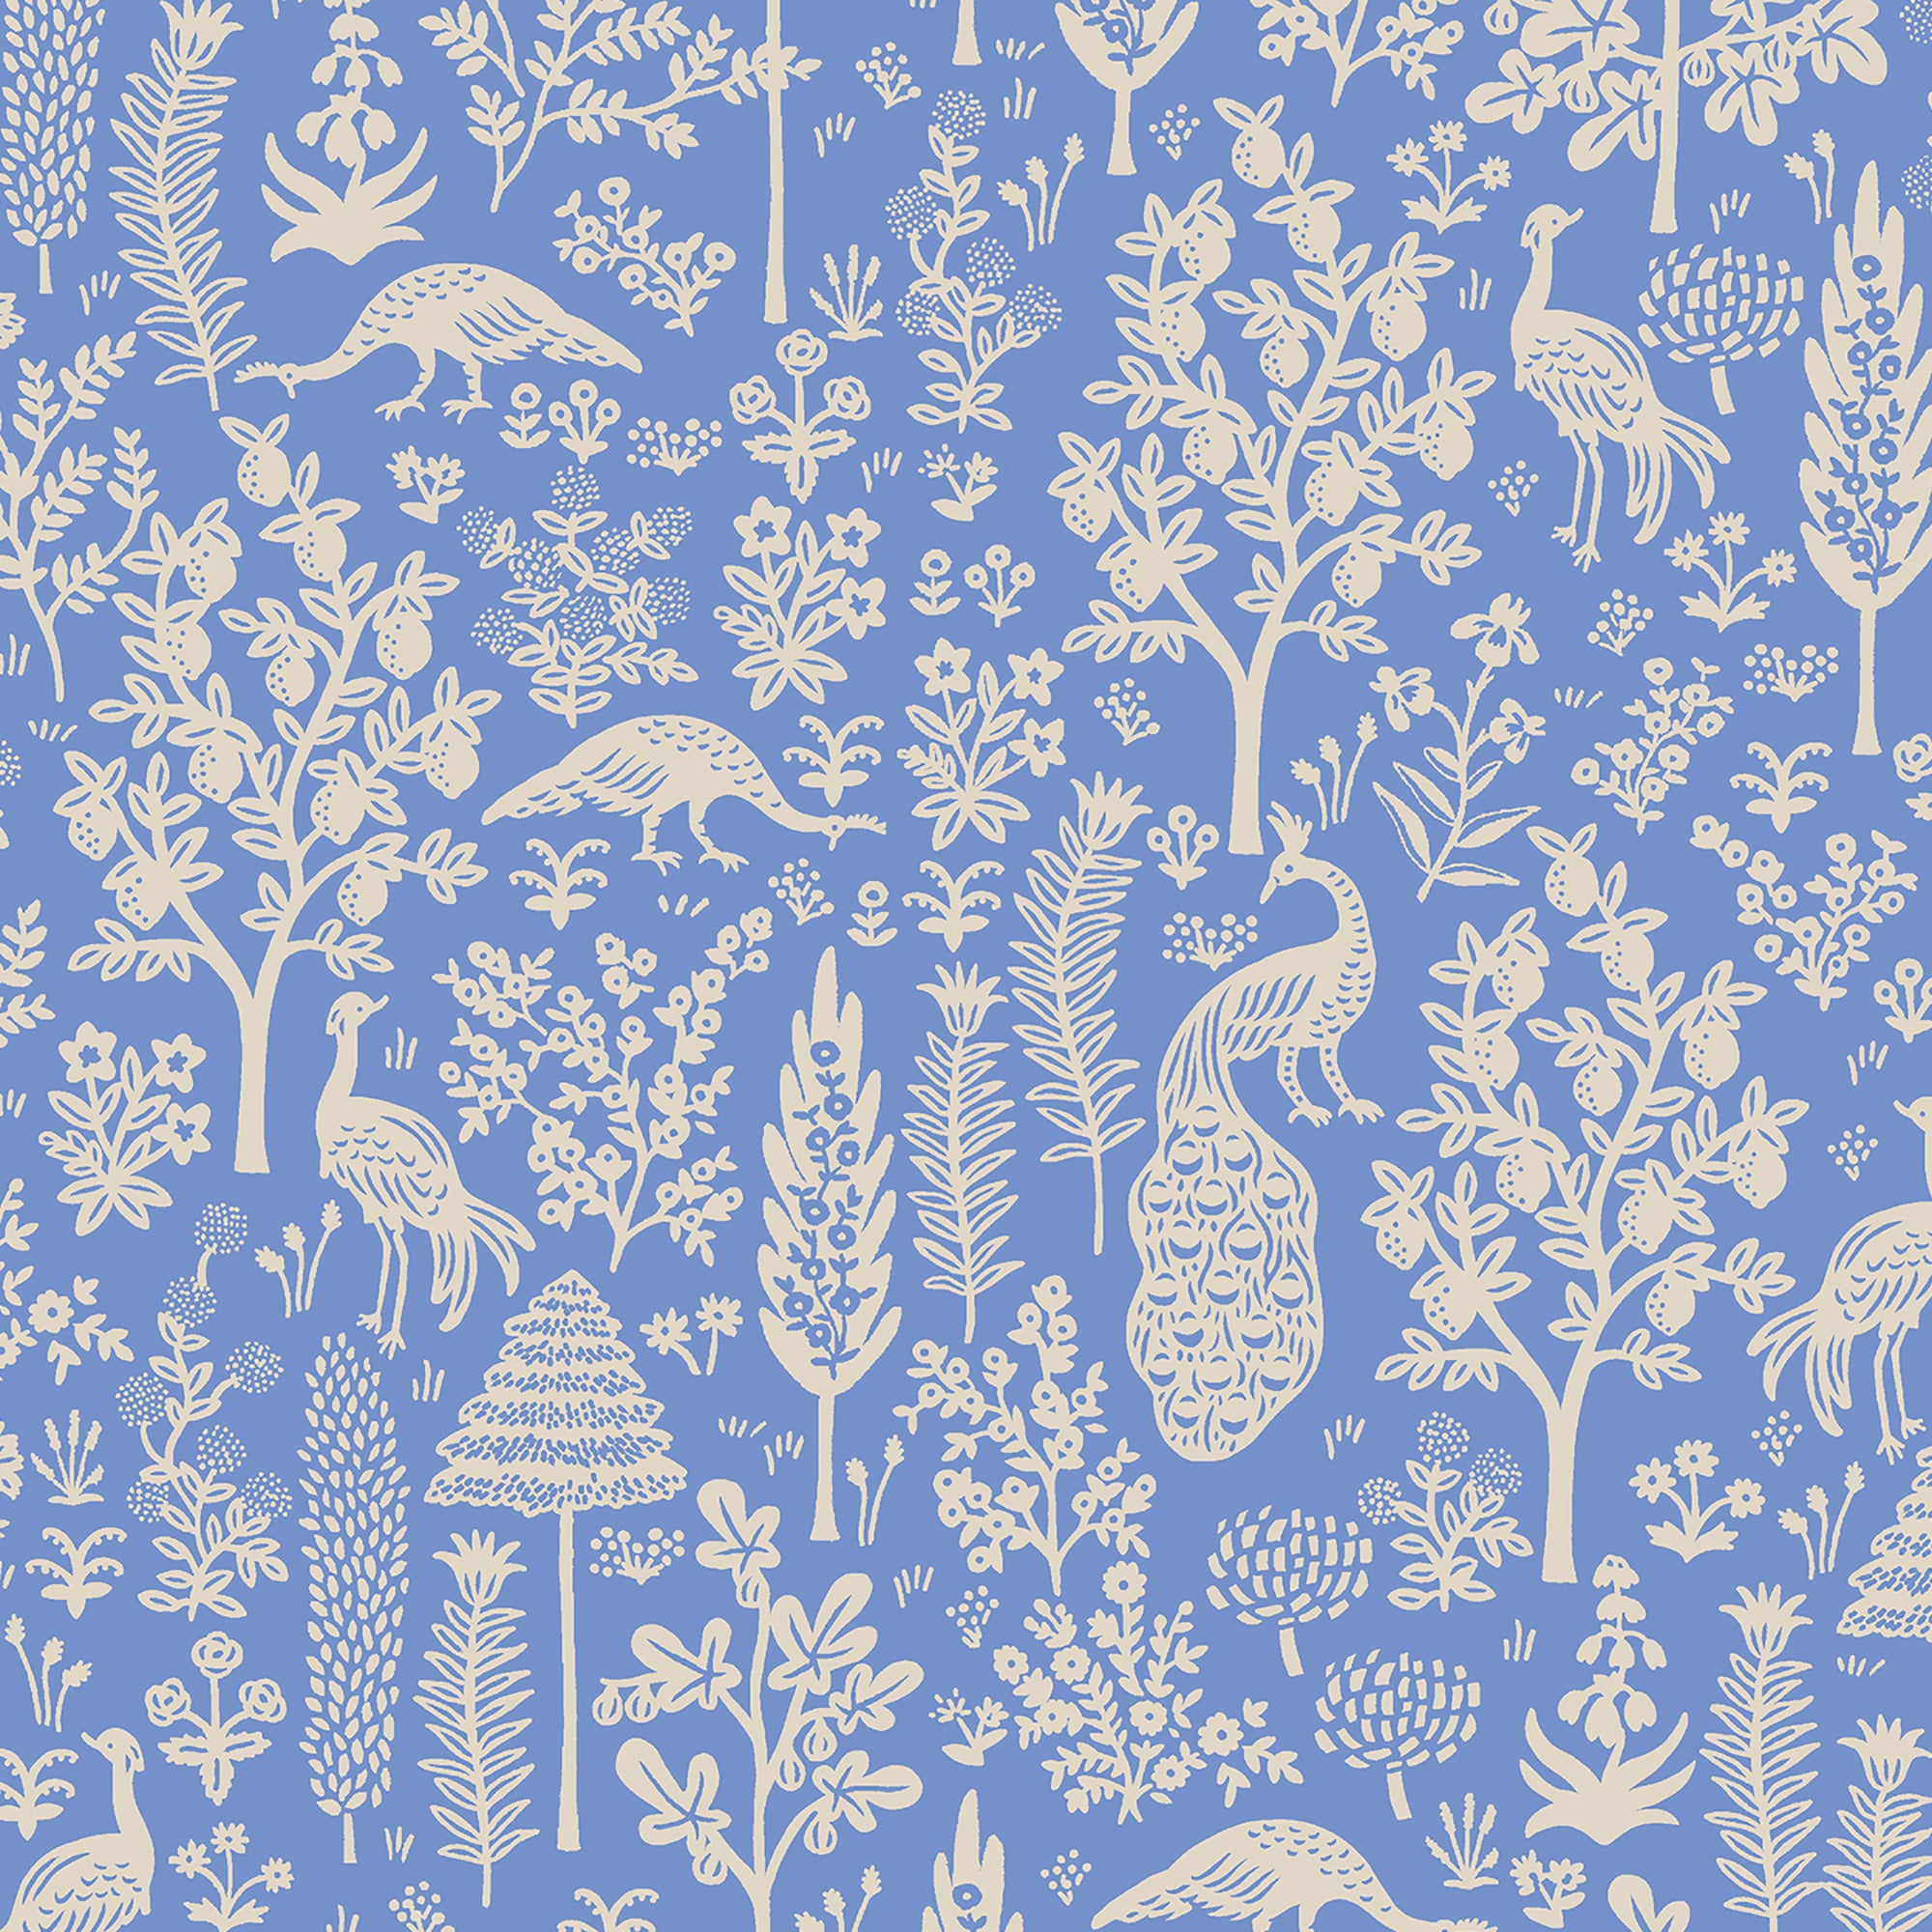 Camont - Menagerie Silhouette Blue Fabric